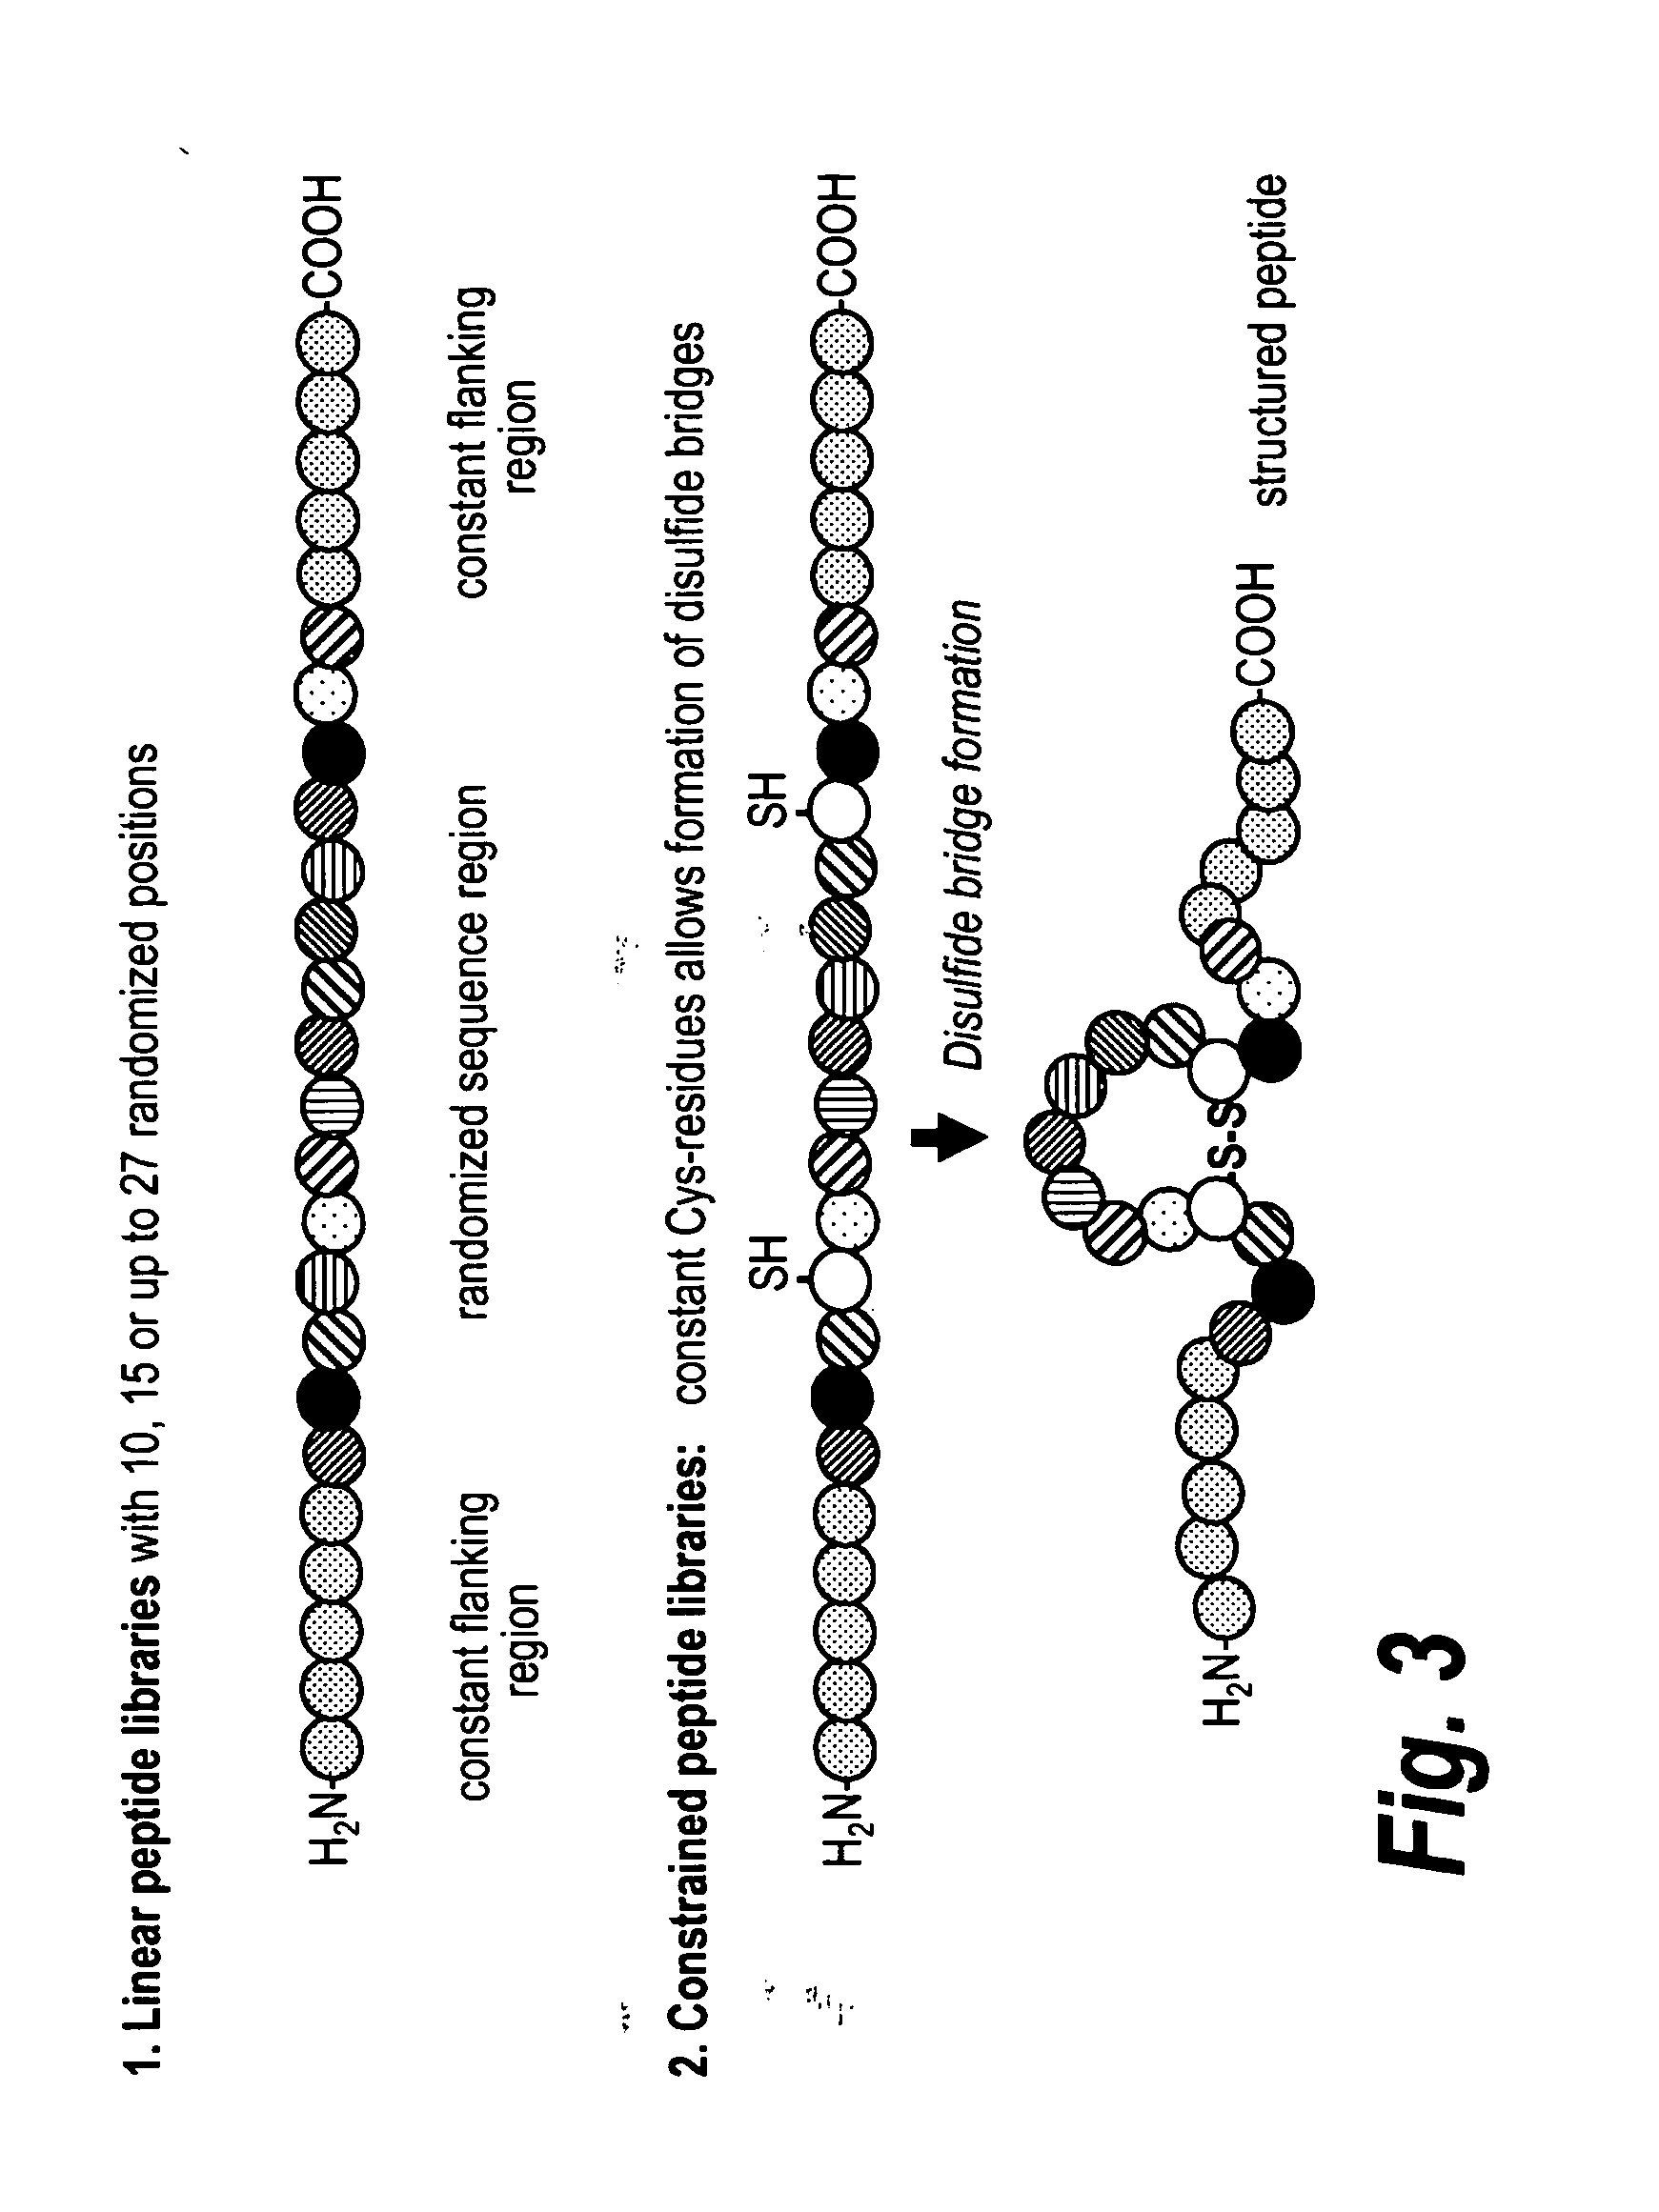 High affinity adaptor molecules for redirecting antibody specifity